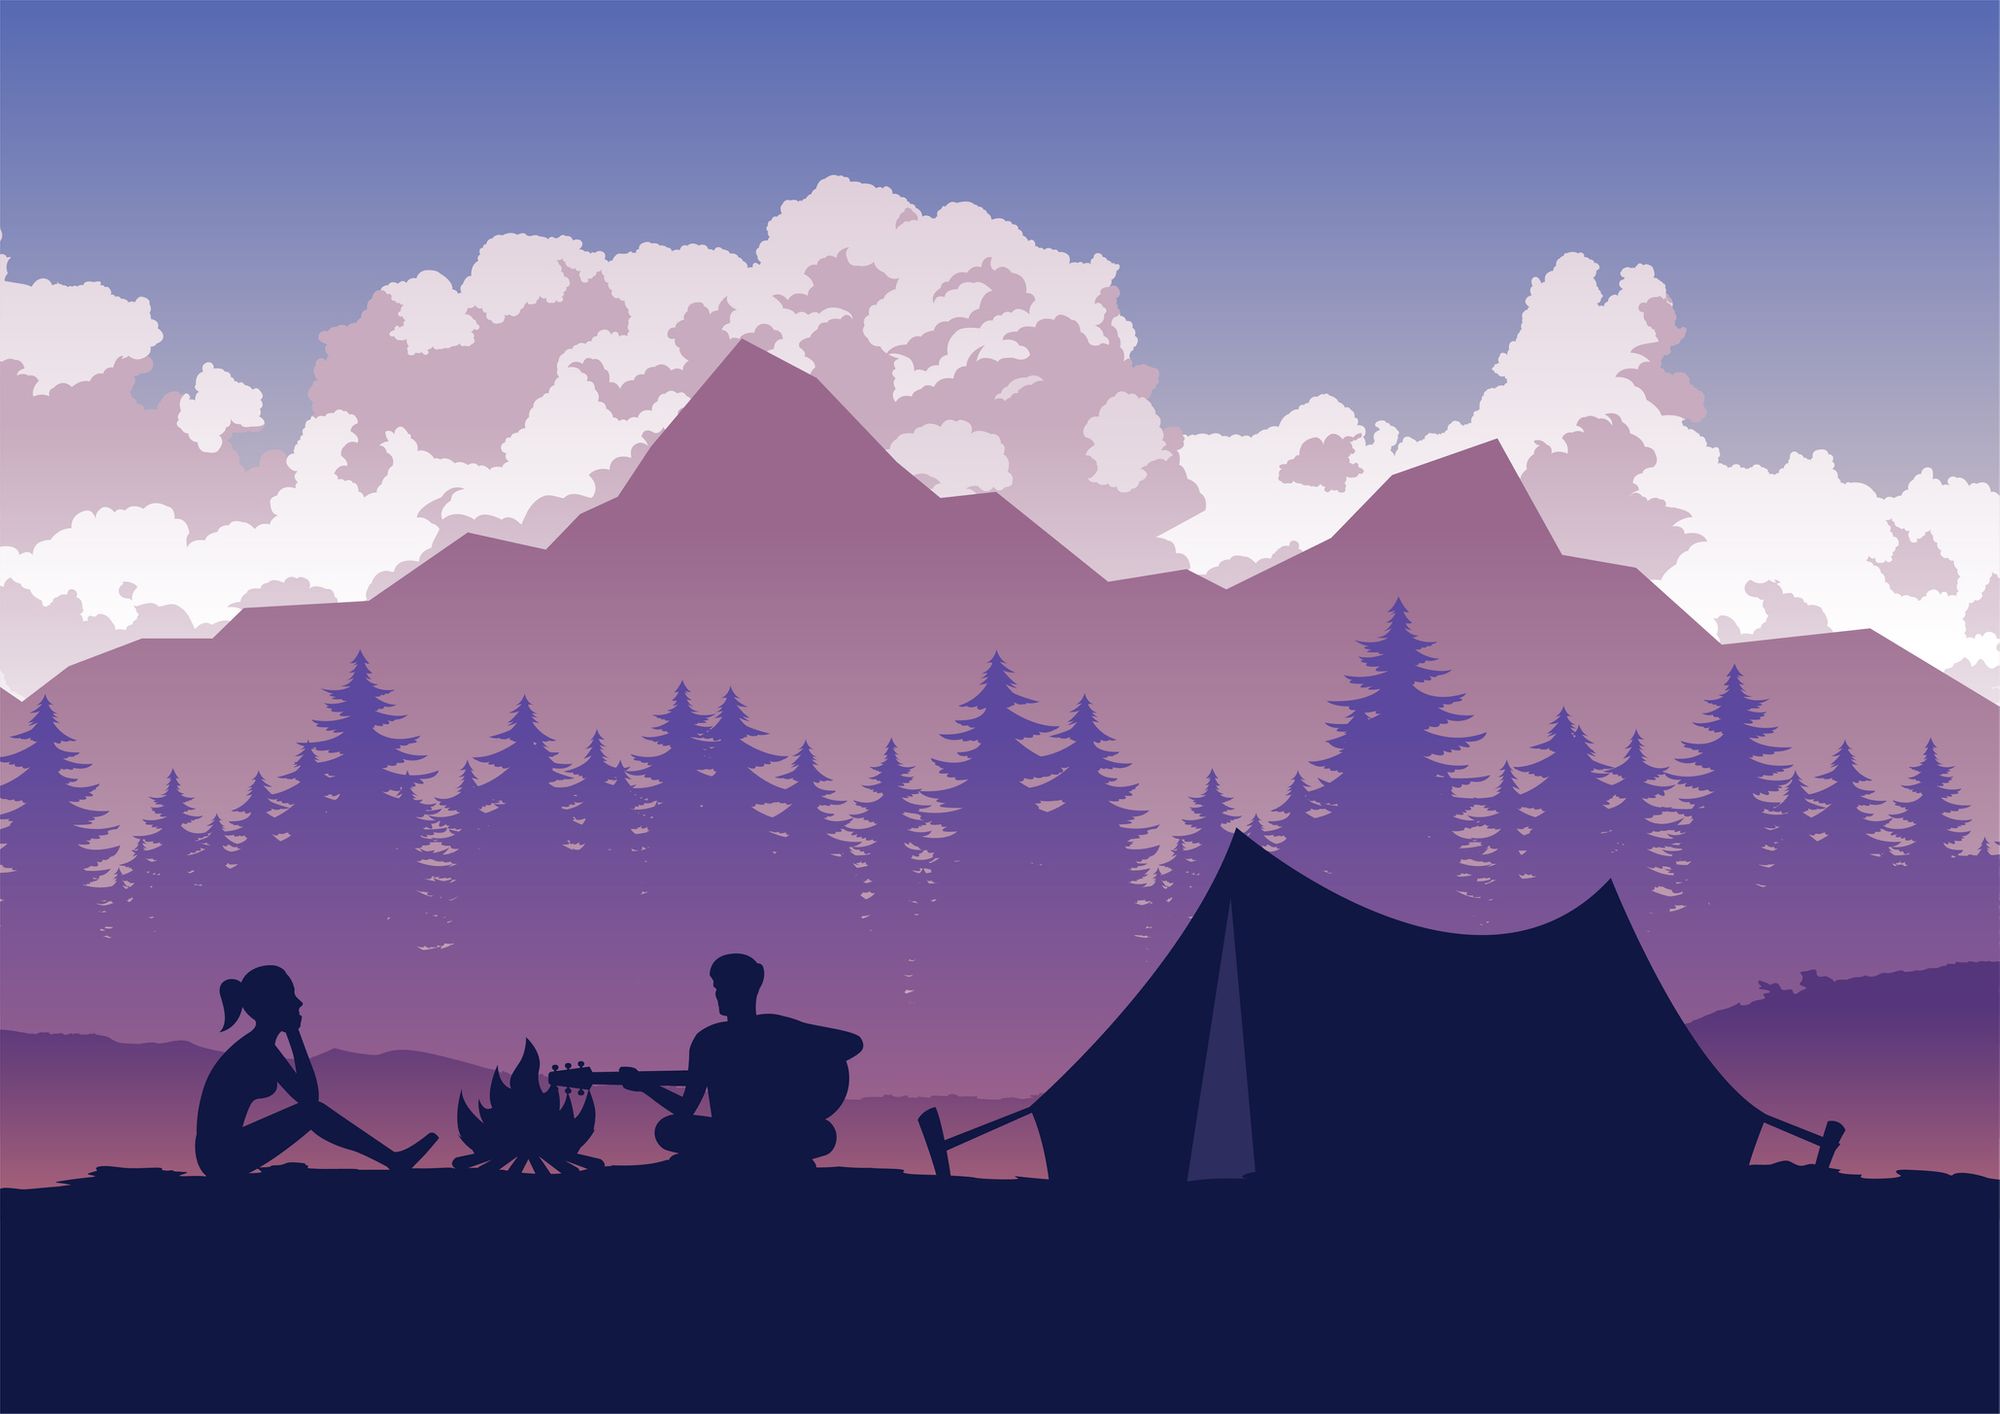 An illustration of two people silhouetted by a campfire.